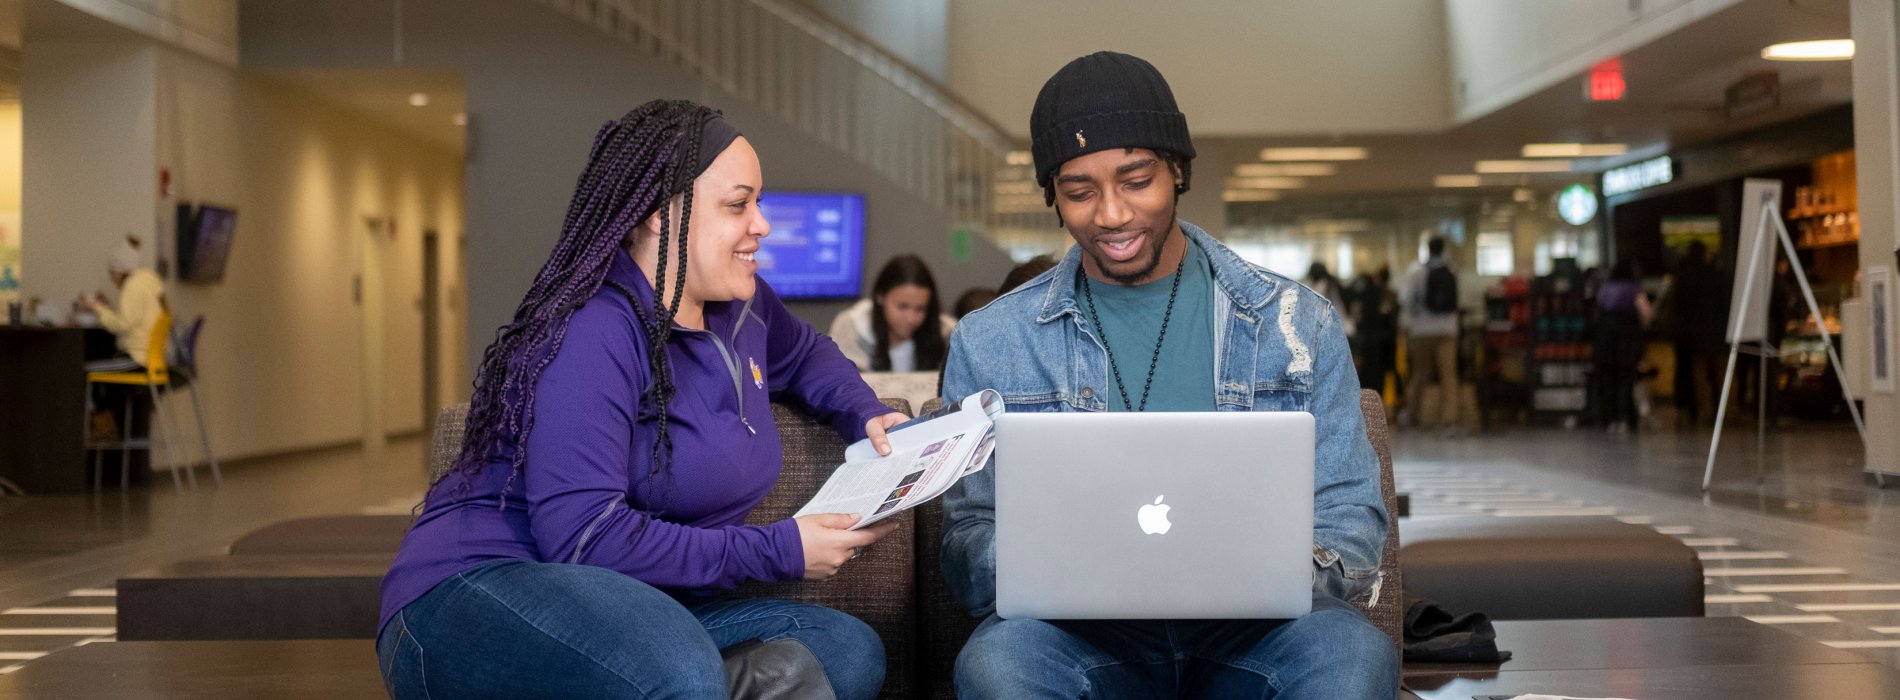 Two smiling students sit in Campus Center holding a laptop and some papers.